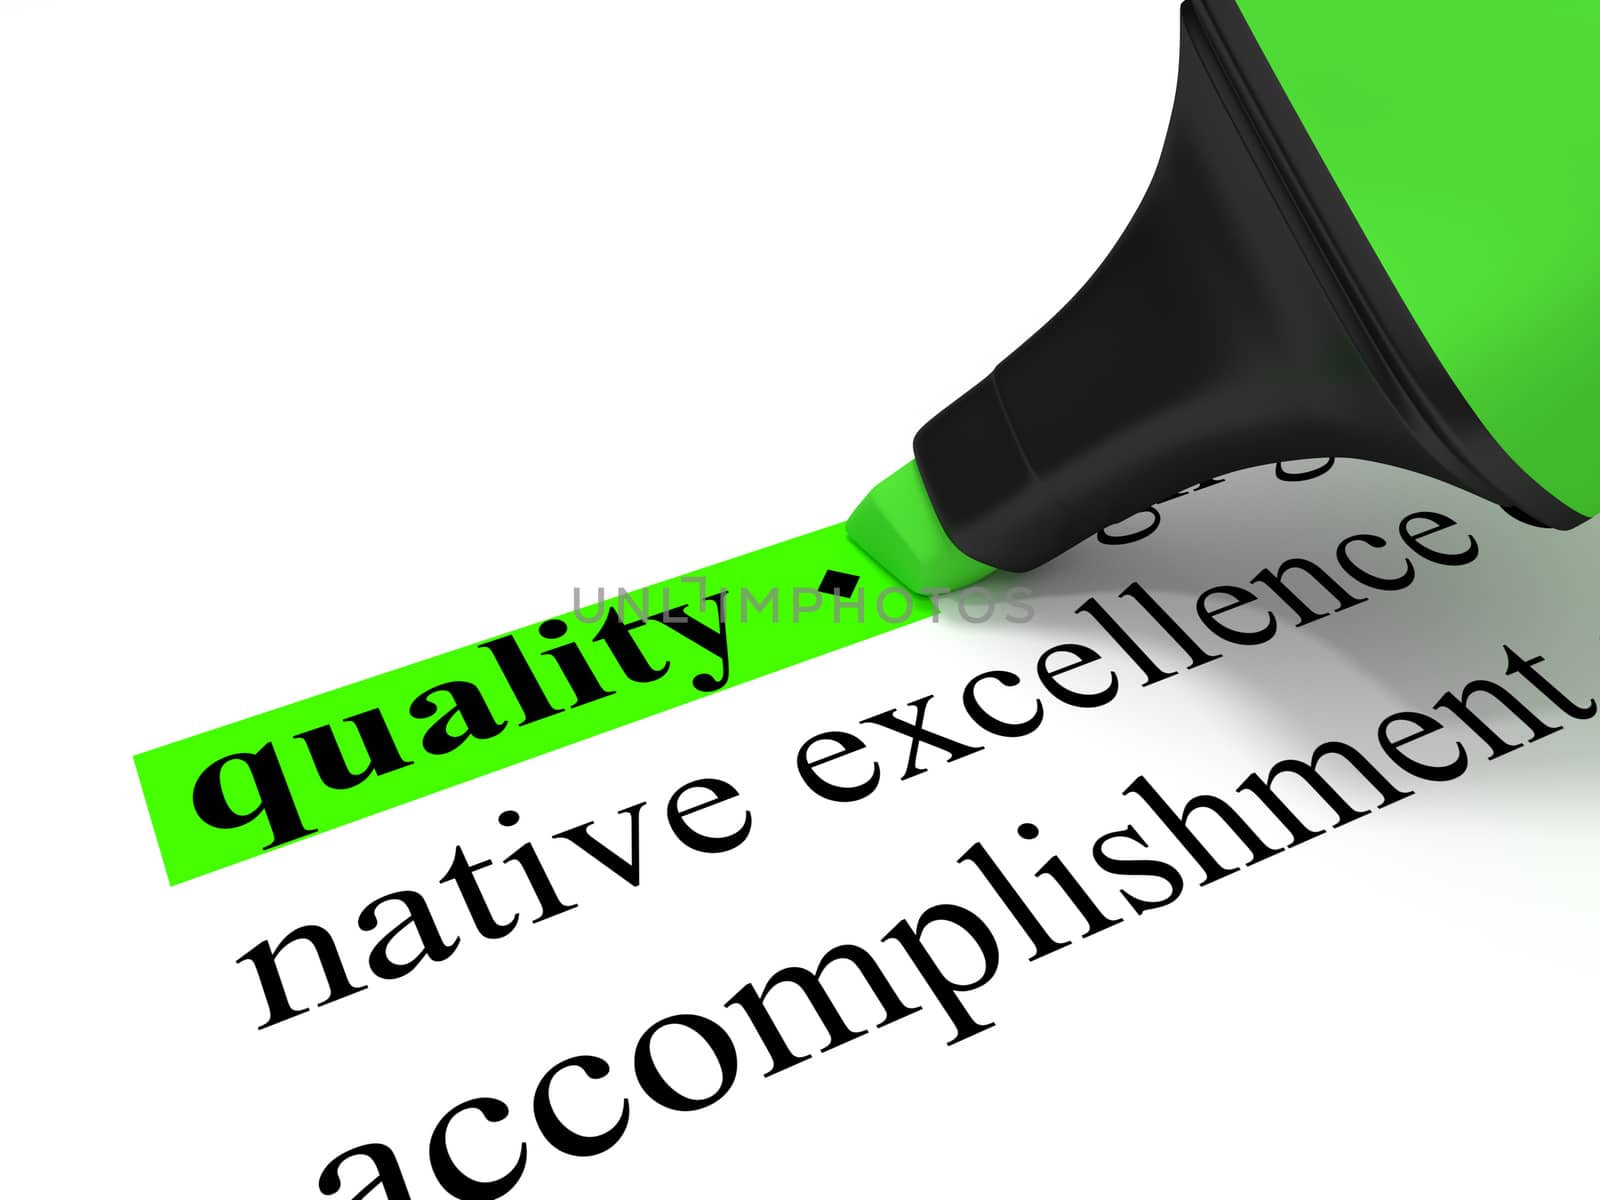 The dictionary-word "quality" marked with a green marker.